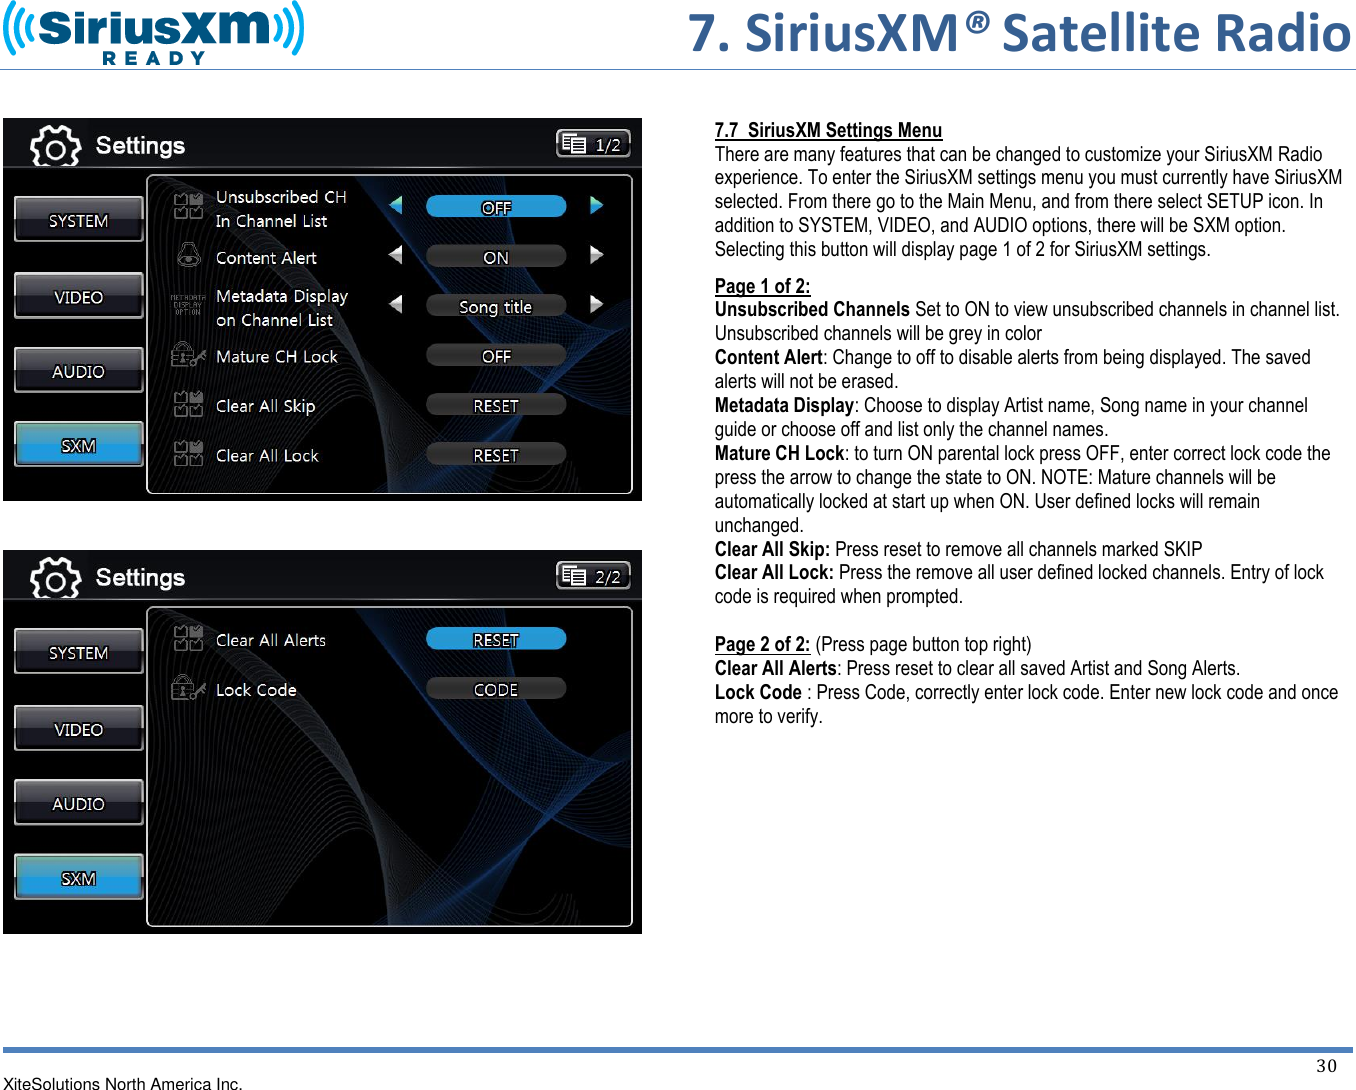     7. SiriusXM® Satellite Radio   XiteSolutions North America Inc.    30             7.7  SiriusXM Settings Menu There are many features that can be changed to customize your SiriusXM Radio experience. To enter the SiriusXM settings menu you must currently have SiriusXM selected. From there go to the Main Menu, and from there select SETUP icon. In addition to SYSTEM, VIDEO, and AUDIO options, there will be SXM option. Selecting this button will display page 1 of 2 for SiriusXM settings. Page 1 of 2: Unsubscribed Channels Set to ON to view unsubscribed channels in channel list. Unsubscribed channels will be grey in color Content Alert: Change to off to disable alerts from being displayed. The saved alerts will not be erased. Metadata Display: Choose to display Artist name, Song name in your channel guide or choose off and list only the channel names. Mature CH Lock: to turn ON parental lock press OFF, enter correct lock code the press the arrow to change the state to ON. NOTE: Mature channels will be automatically locked at start up when ON. User defined locks will remain unchanged. Clear All Skip: Press reset to remove all channels marked SKIP Clear All Lock: Press the remove all user defined locked channels. Entry of lock code is required when prompted.  Page 2 of 2: (Press page button top right) Clear All Alerts: Press reset to clear all saved Artist and Song Alerts. Lock Code : Press Code, correctly enter lock code. Enter new lock code and once more to verify.         